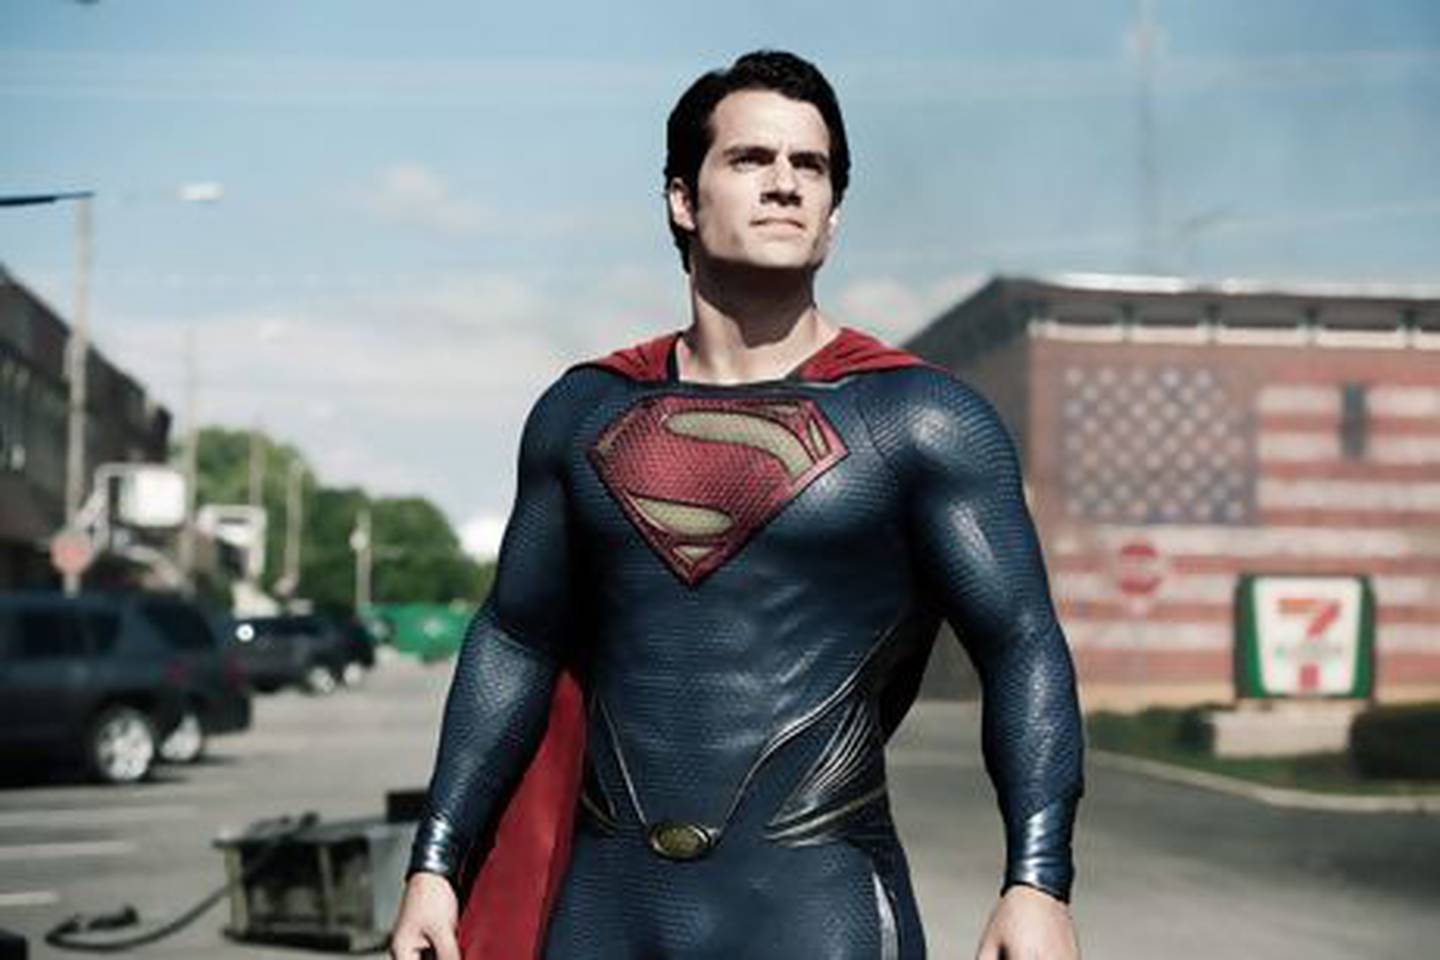 Henry Cavill as Superman in 'Man of Steel'. AP Photo / Warner Bros. Pictures